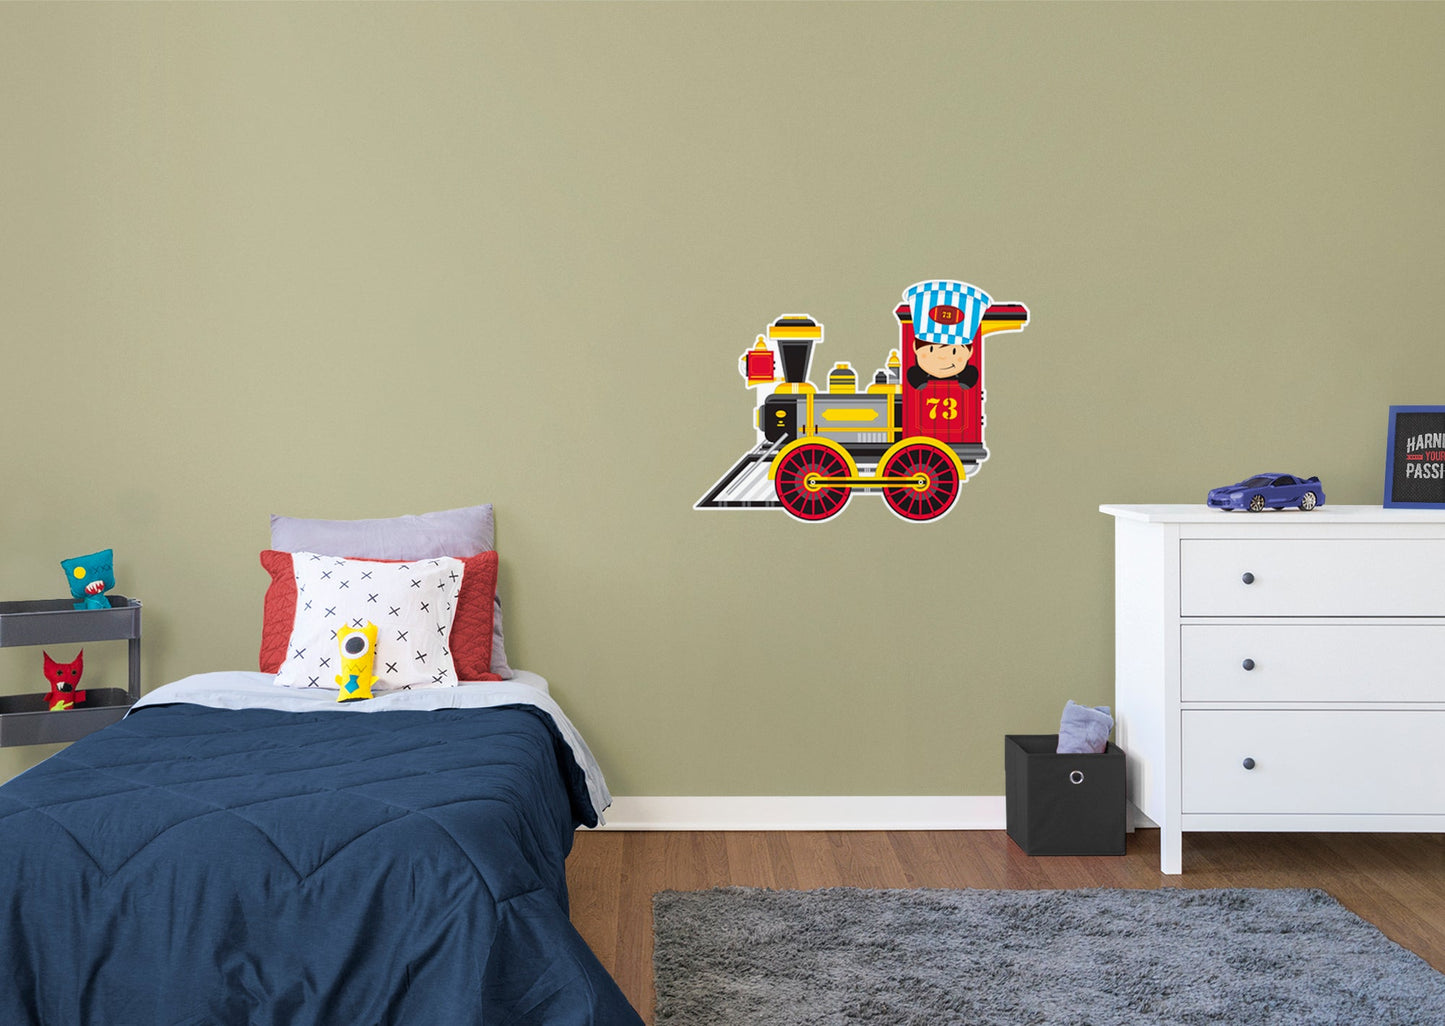 Nursery:  Engine Icon        -   Removable Wall   Adhesive Decal